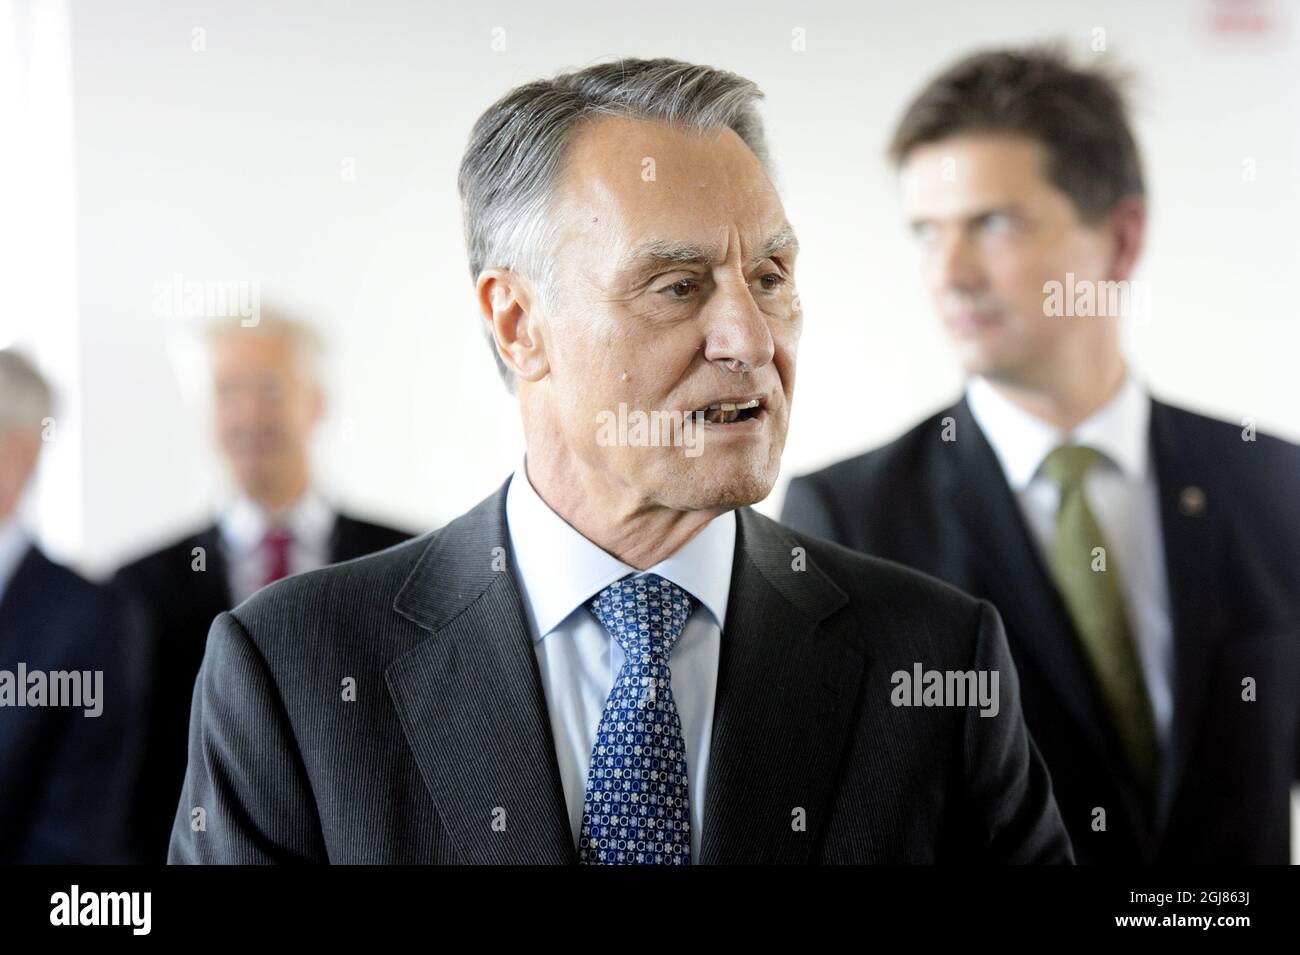 LUND 2013-10-03 Portugal's President Anibal Cavaco Silva is seen during a visit to Ideon Gateway in Lund, Sweden, October 3, 2013. The Presidential Couple accompanied by Sweden's Crown Princess couple get an insight into how to build a brand new district for world-leading research and innovation. The President of Portugal is on a State visit to Sweden. Foto: Ludvig Thunman / TT / Kod 10600  Stock Photo